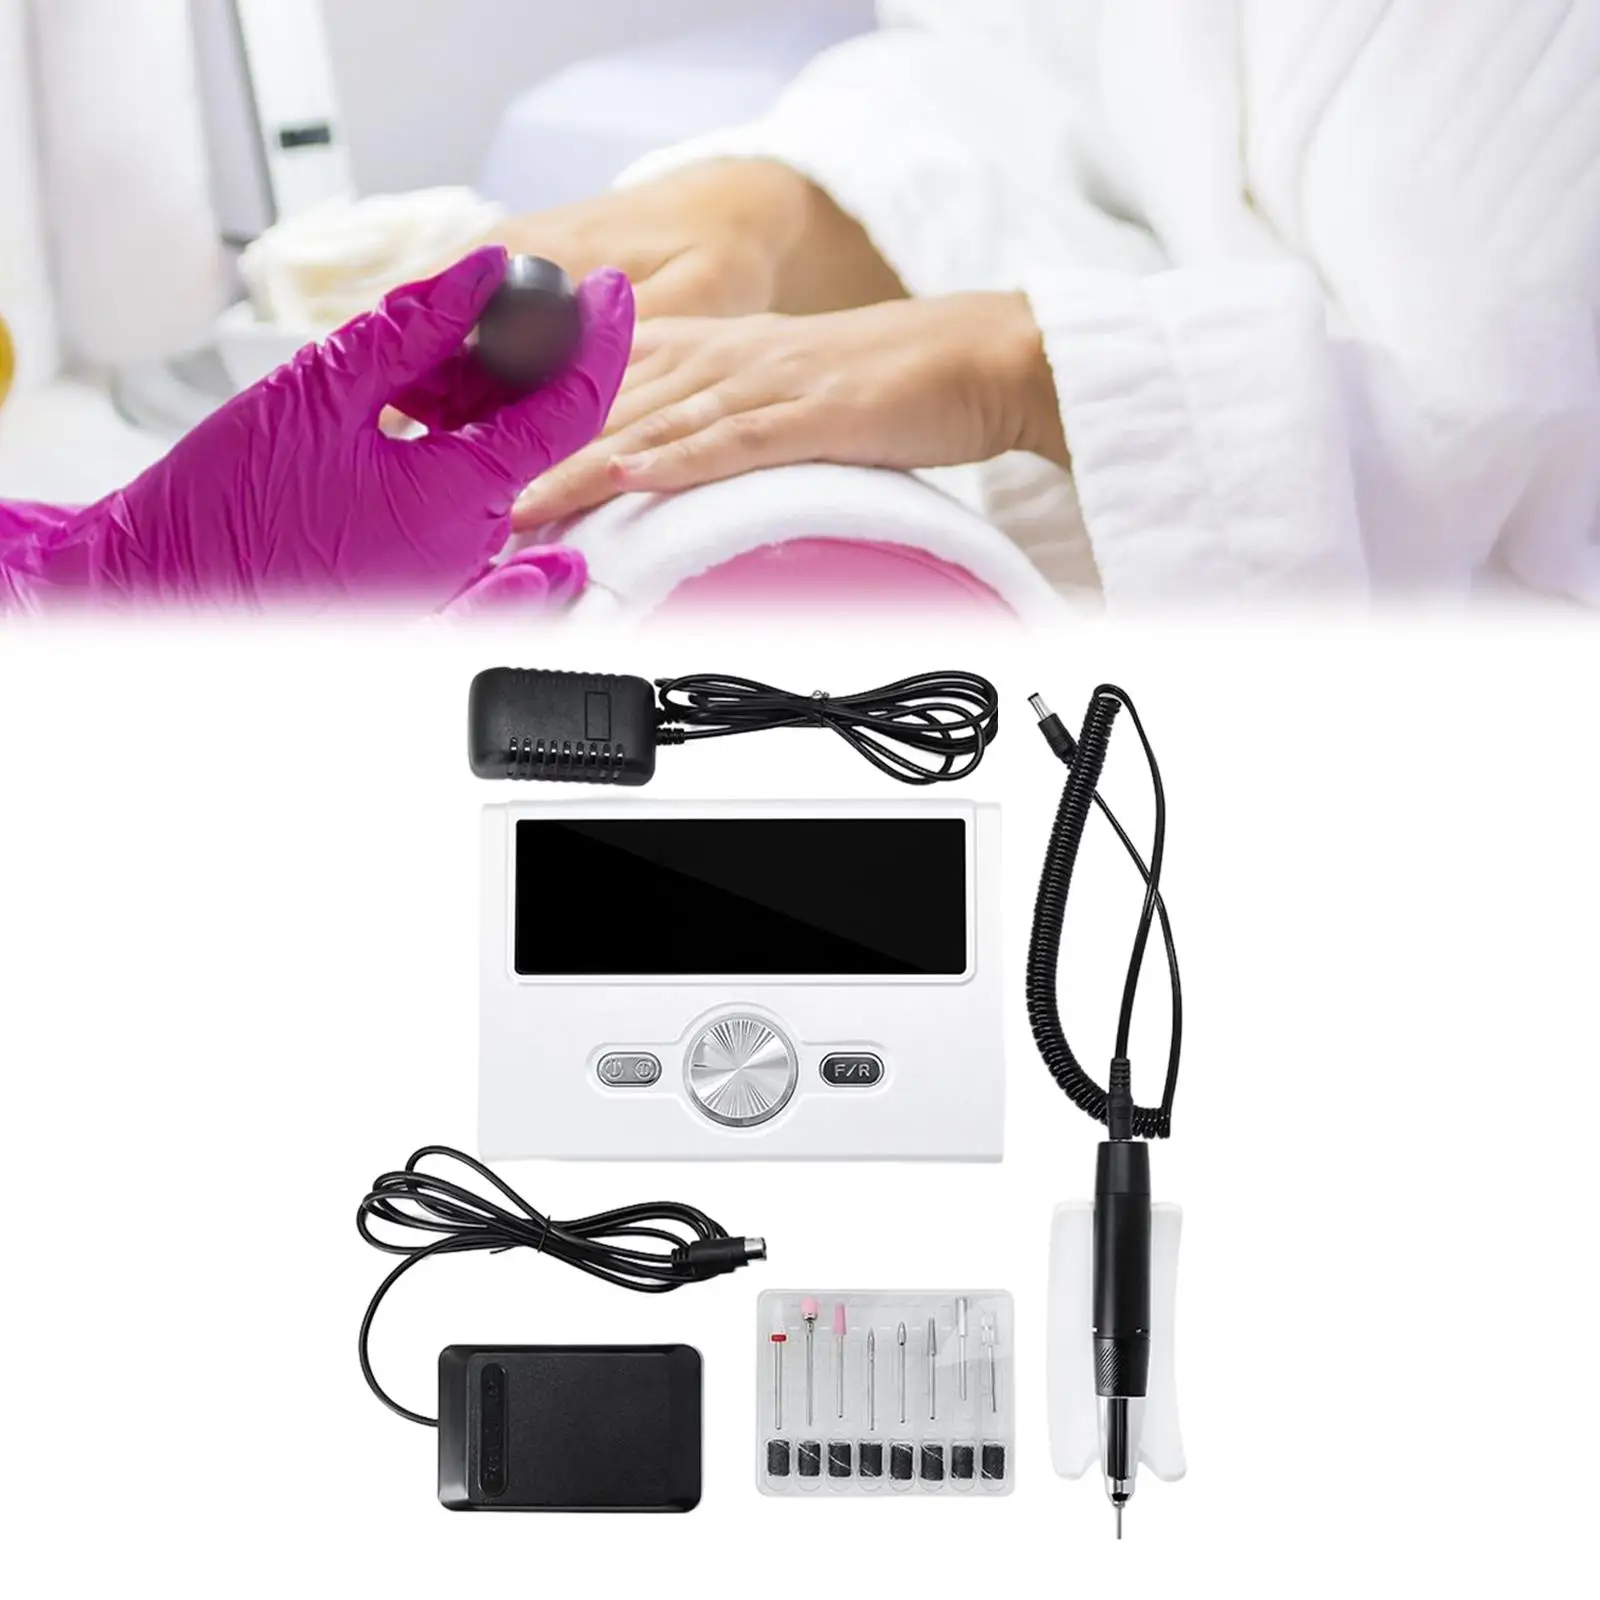 Electric Nail Drill Machine Acrylic Nail Drill Professional 35000RPM Portable Electric Nail File Machine for Acrylic Nails Salon